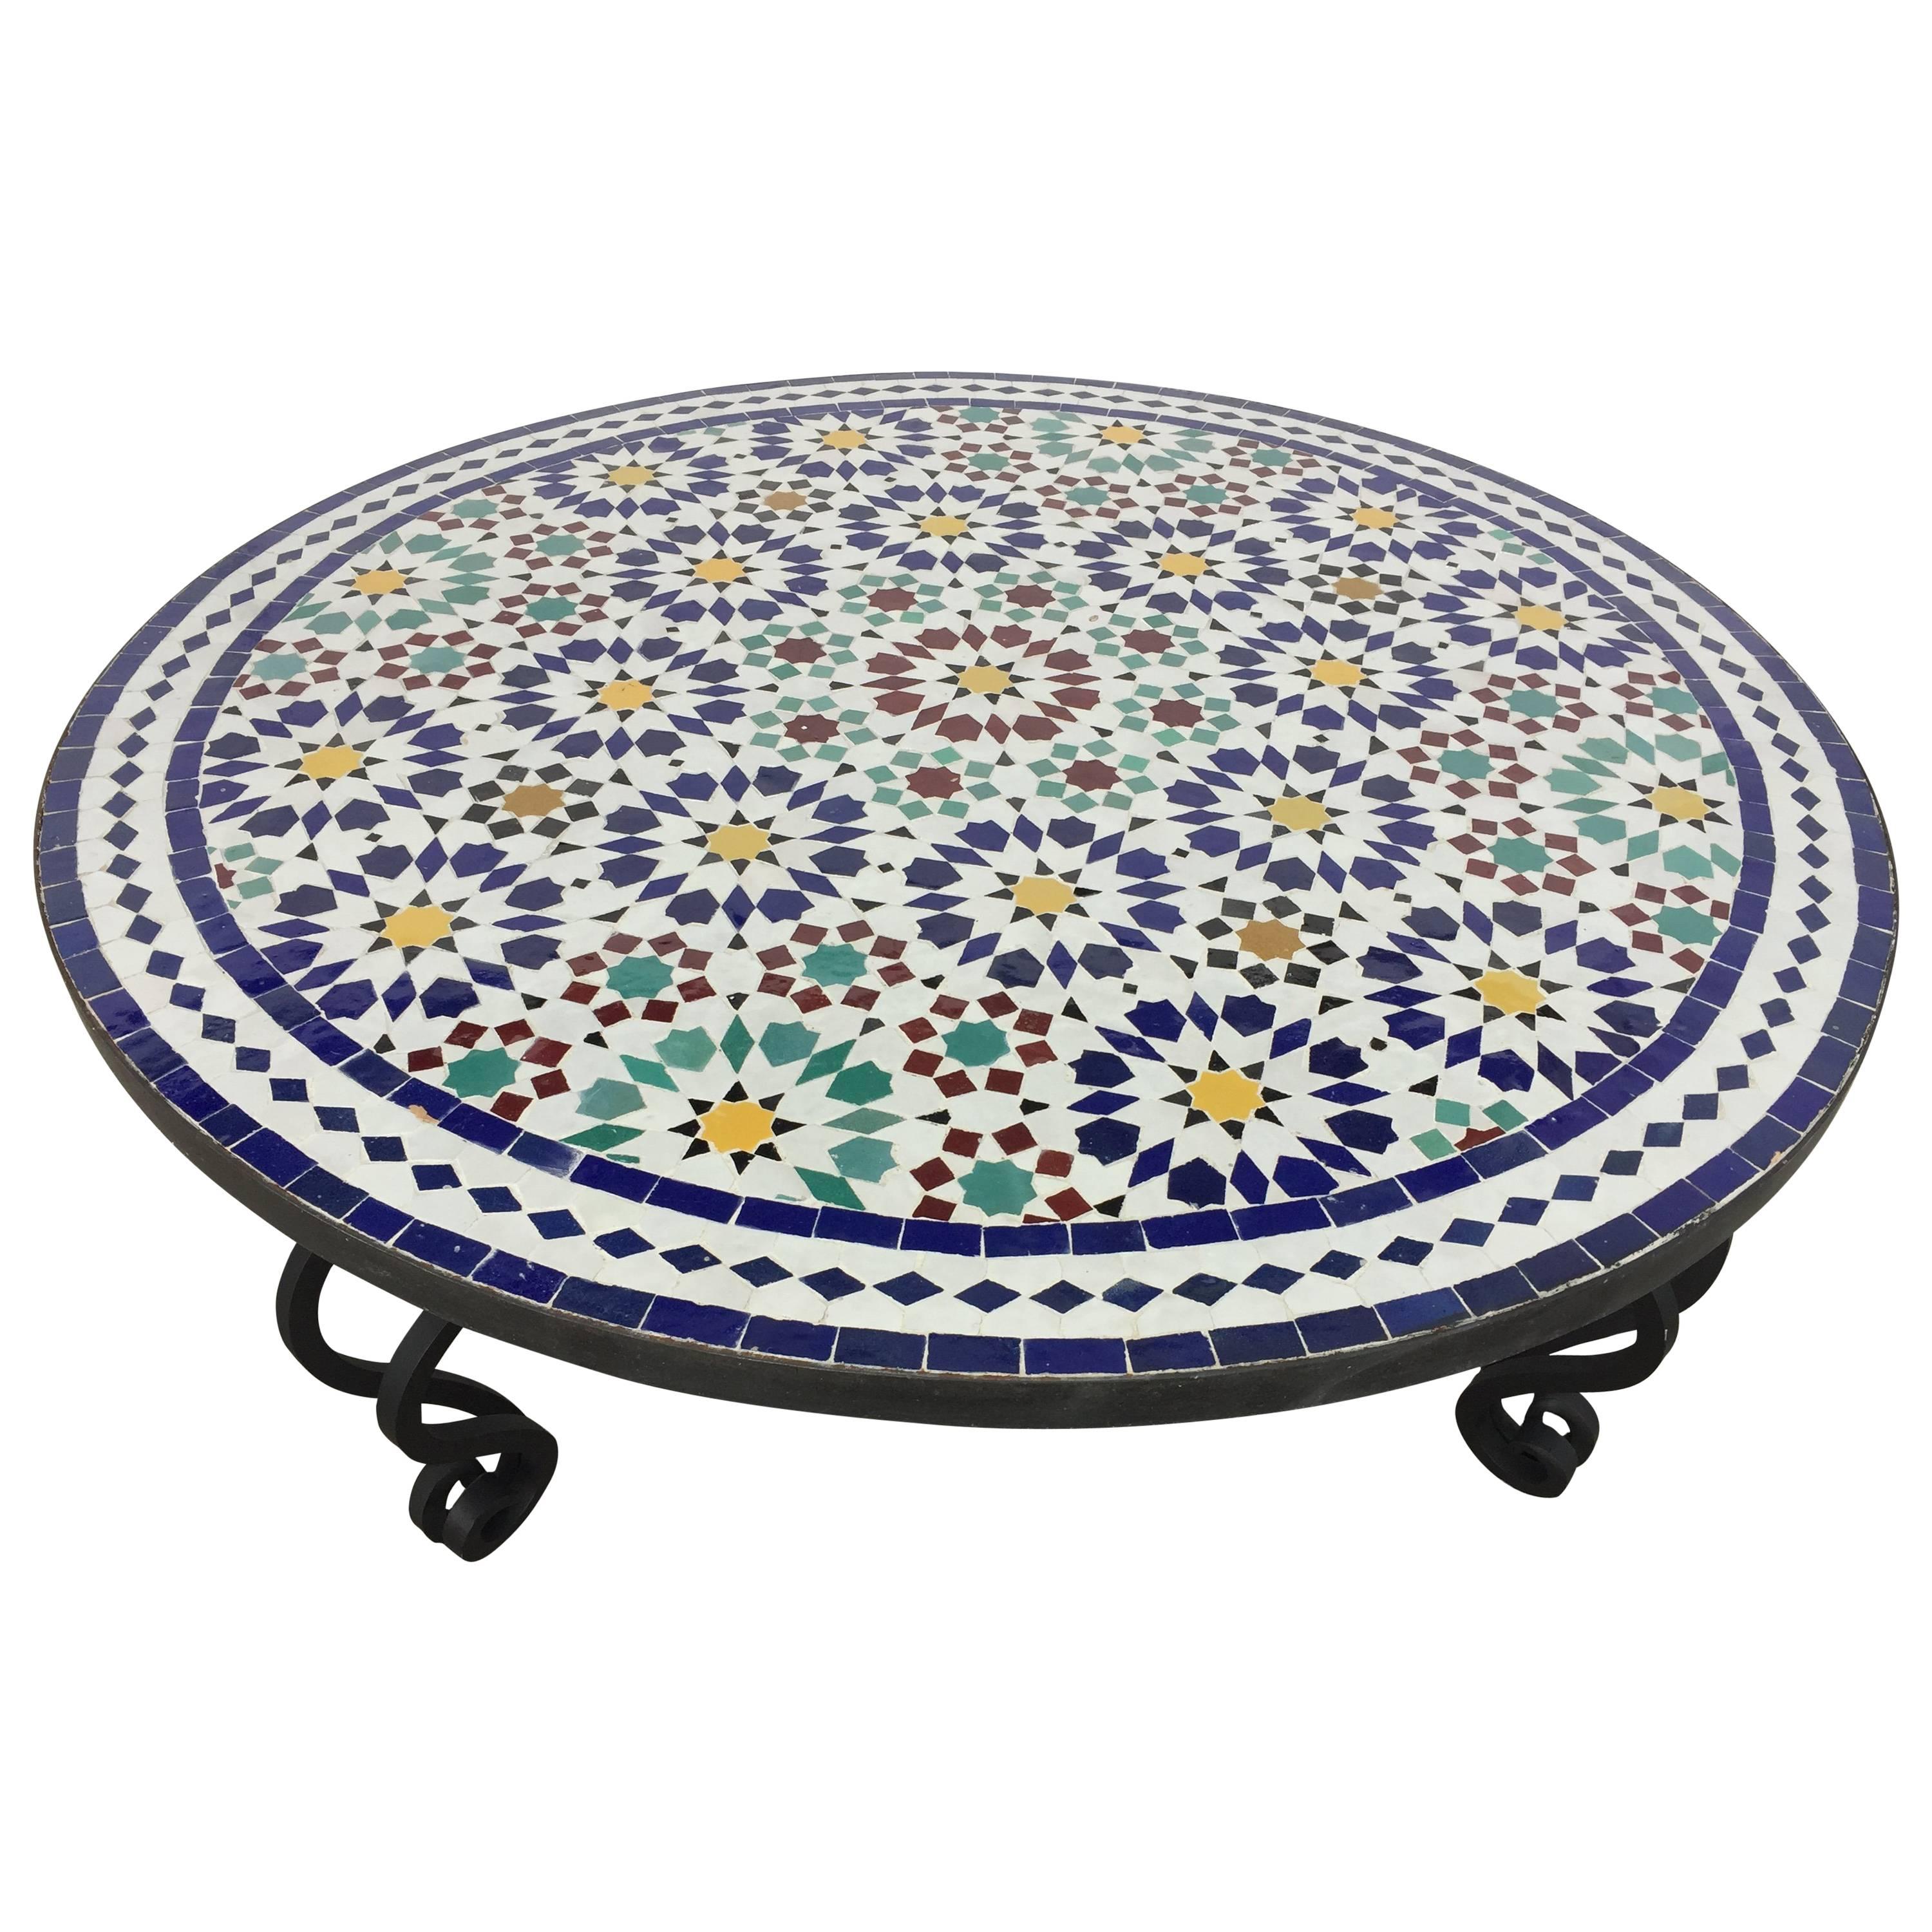 Moroccan Mosaic Round Tile Coffee table on Iron Base